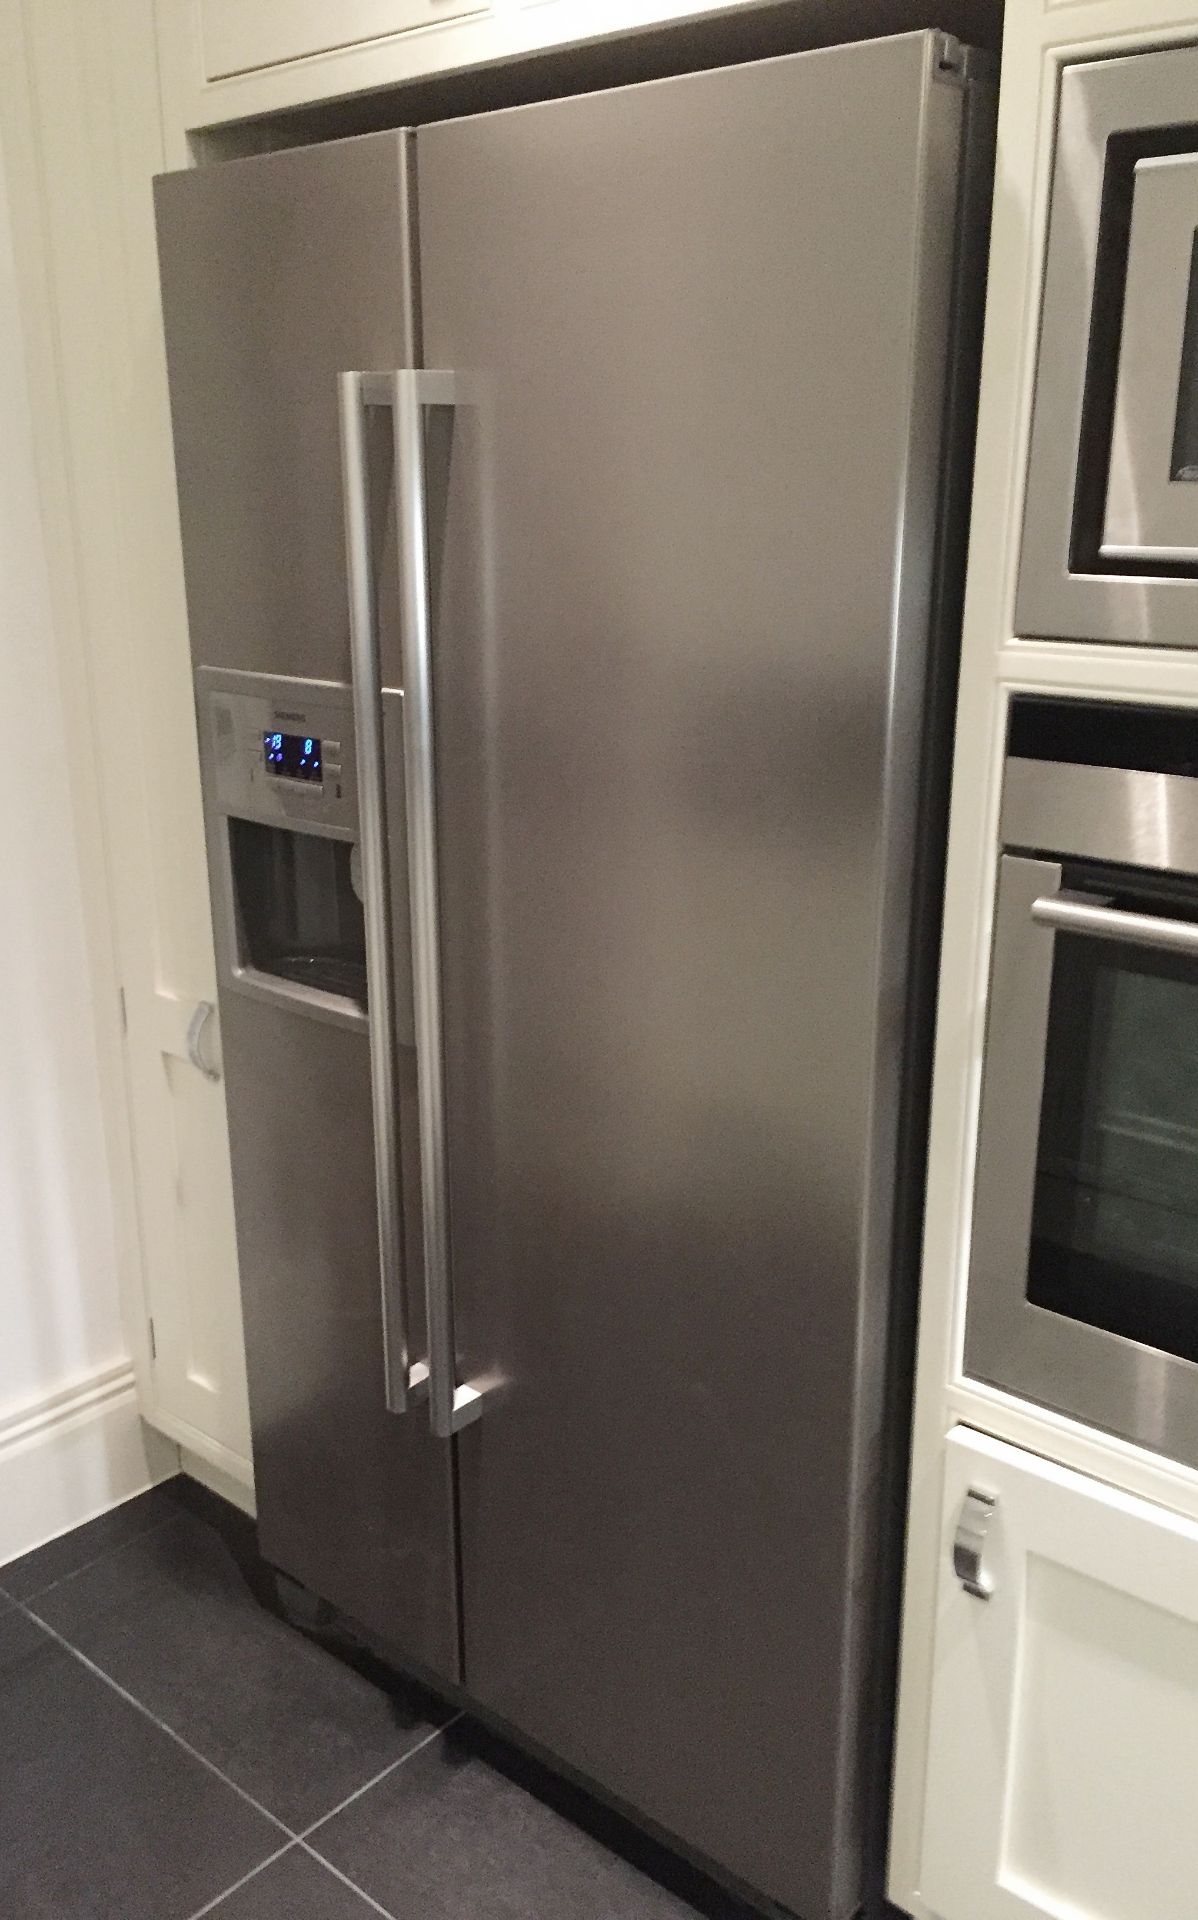 1 x Siemens American Fridge / Freezer - Approx 3-4yrs Old In Excellent Working Condition - CL211 -